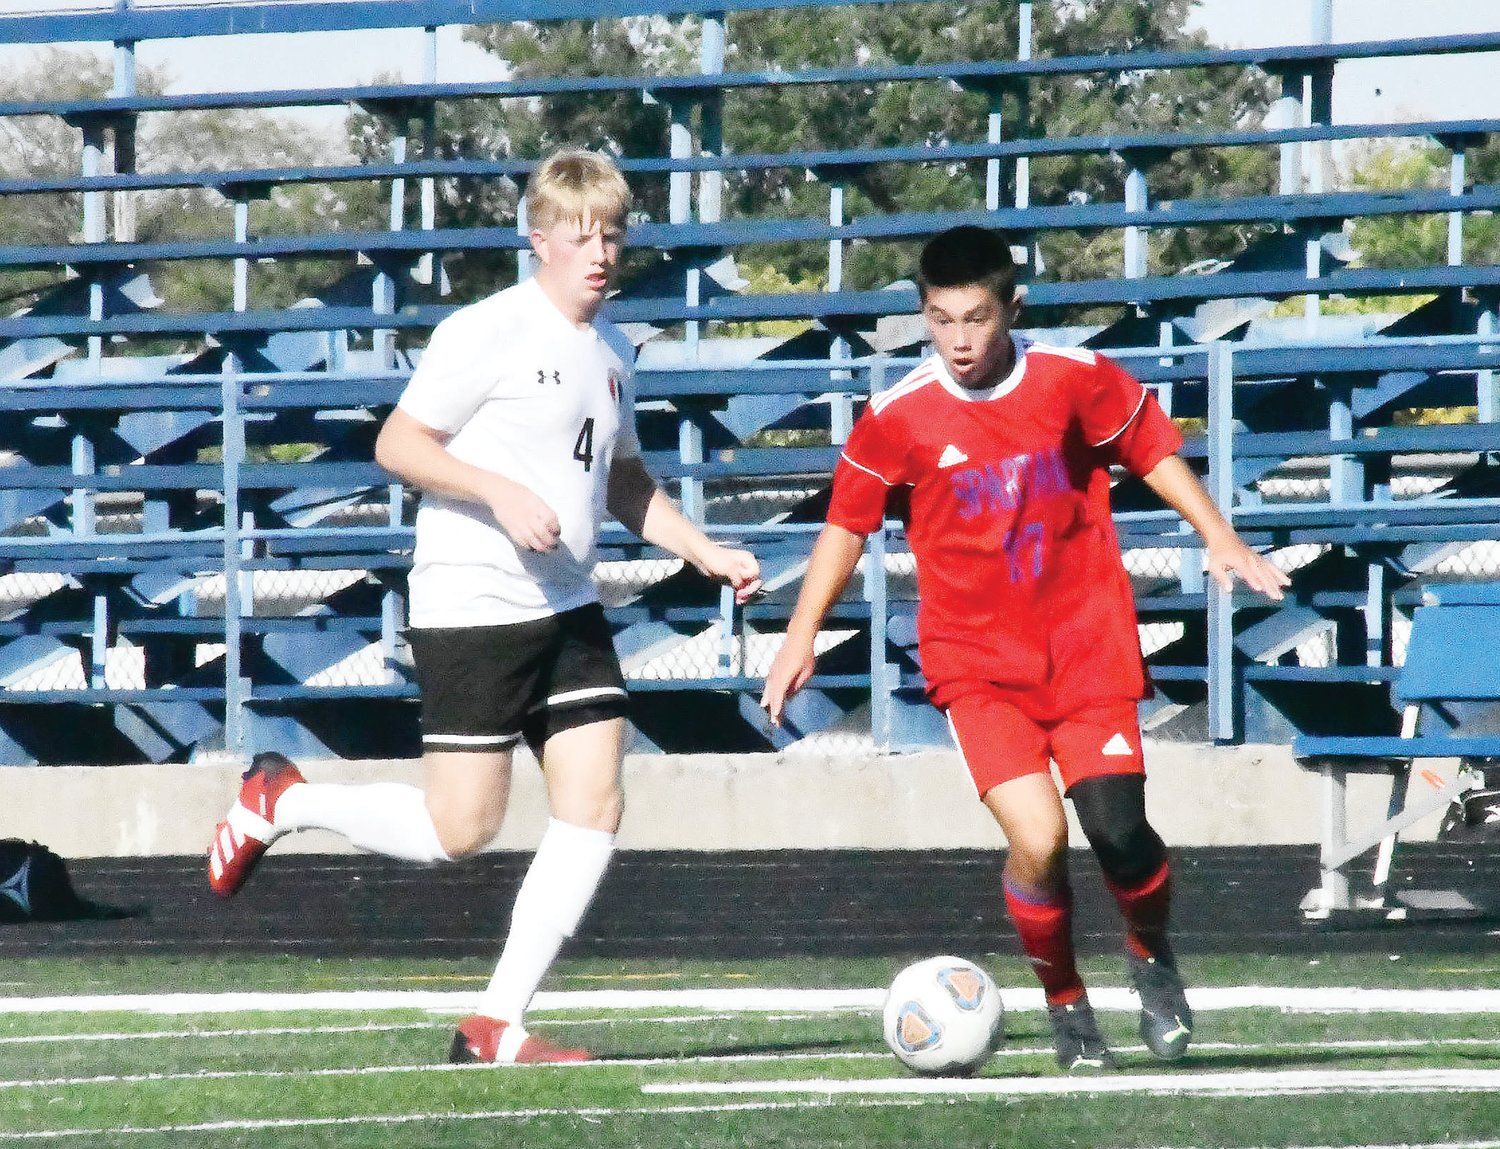 Moberly High School sophomore Ryan O'Loughlin dribbles the ball during a Moberly Tournament match on Saturday, Sept. 24. The Spartans are home this evening for a match against Battle (Columbia).